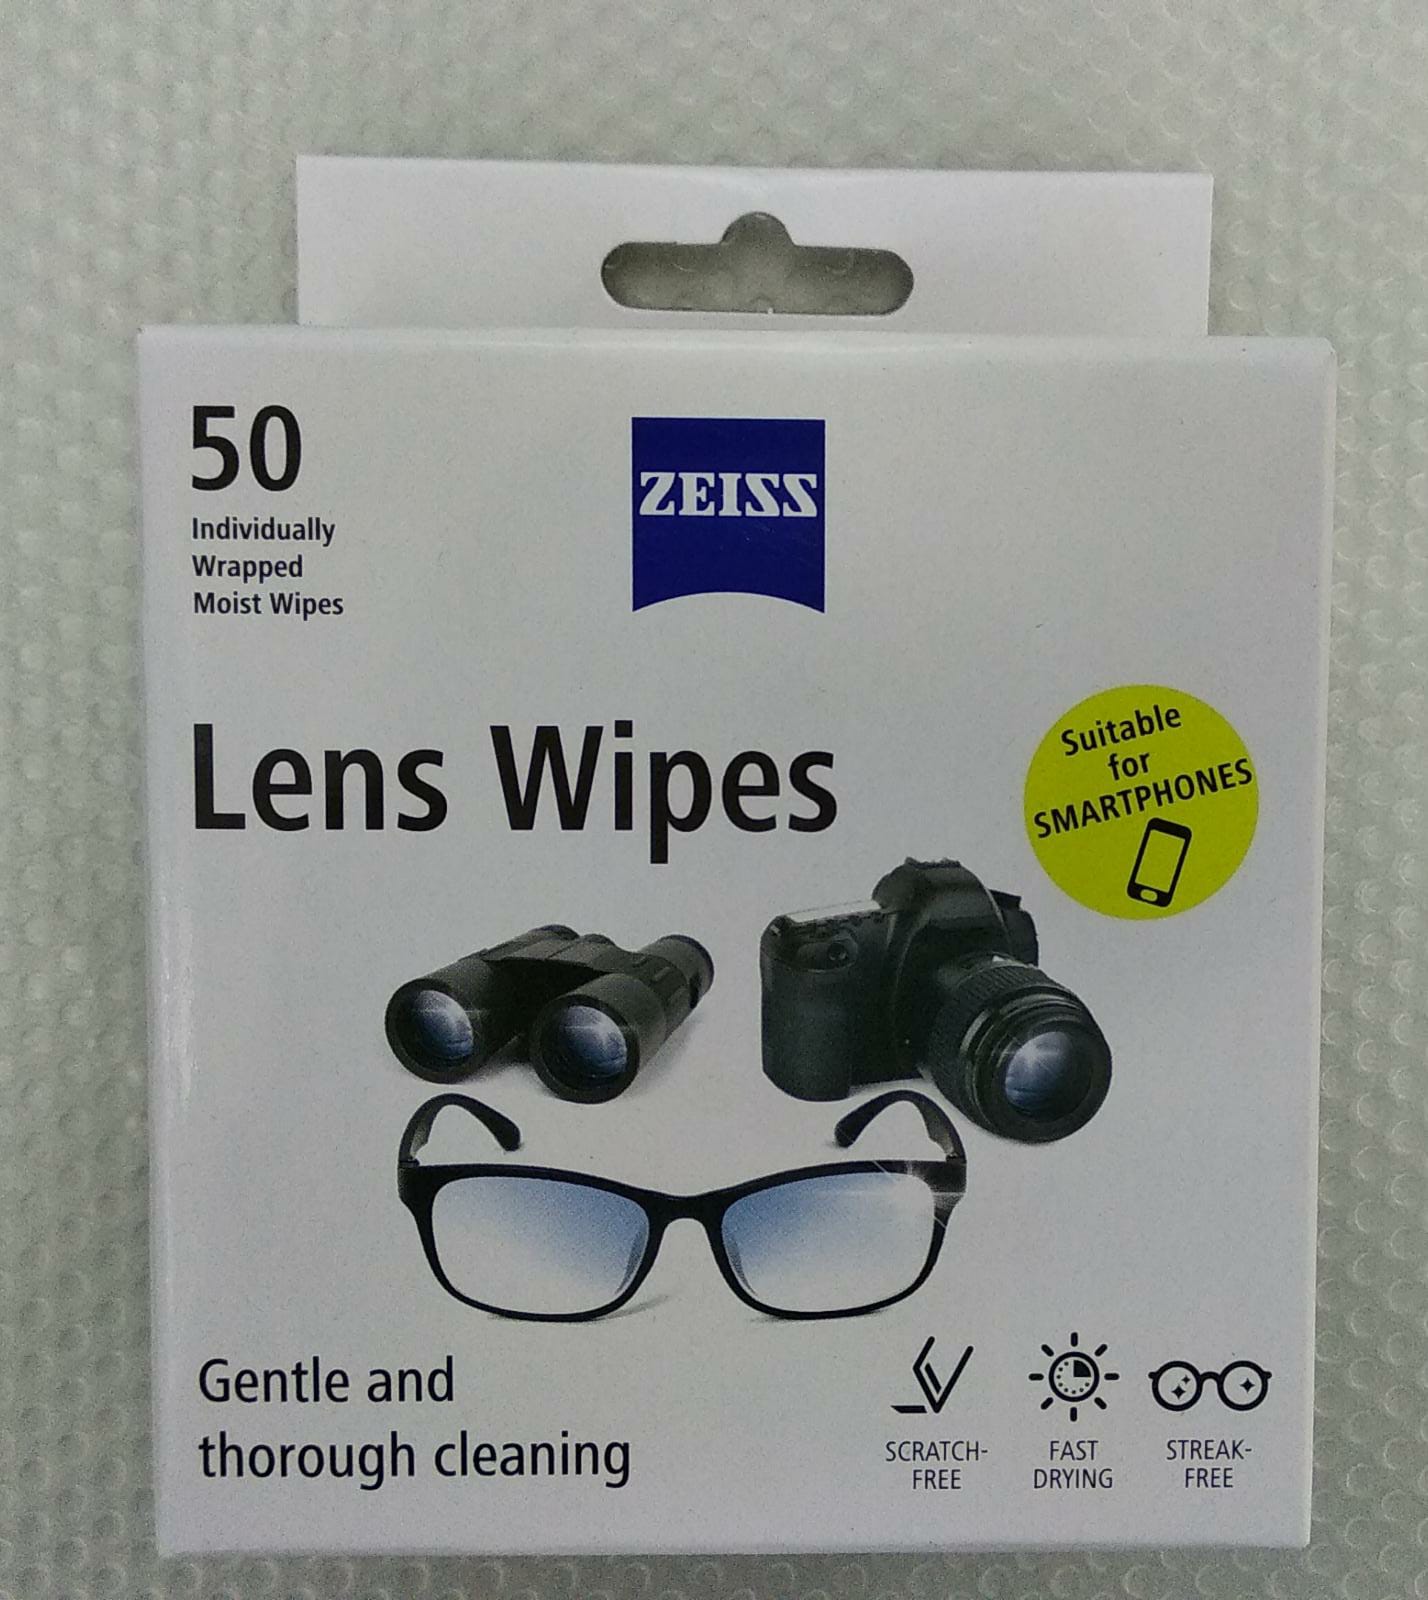 Zeiss lens wipes